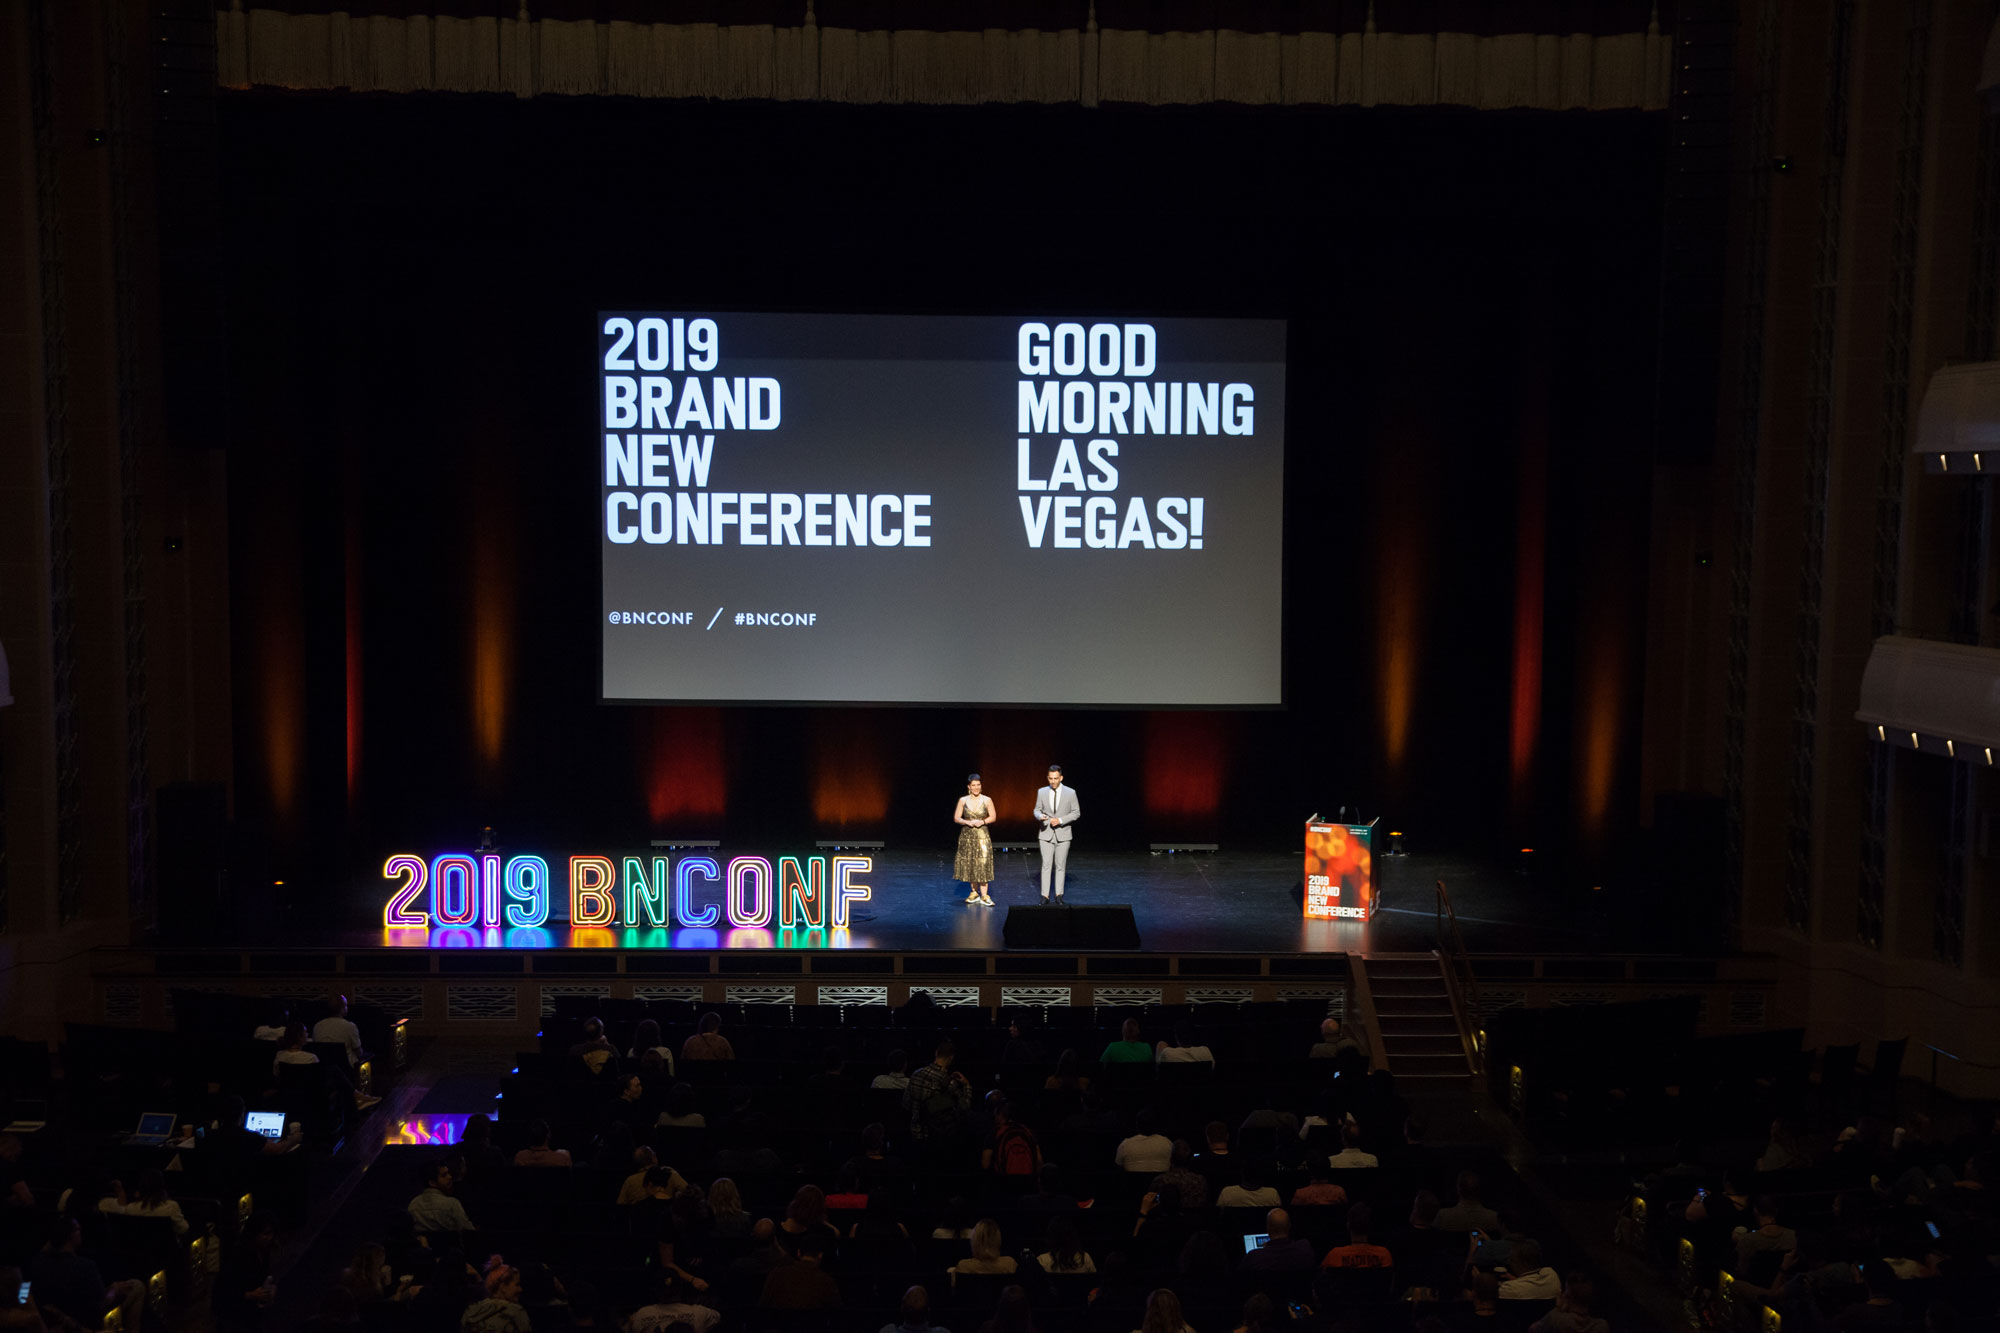 New Logo and Identity for 2019 Brand New Conference by UnderConsideration